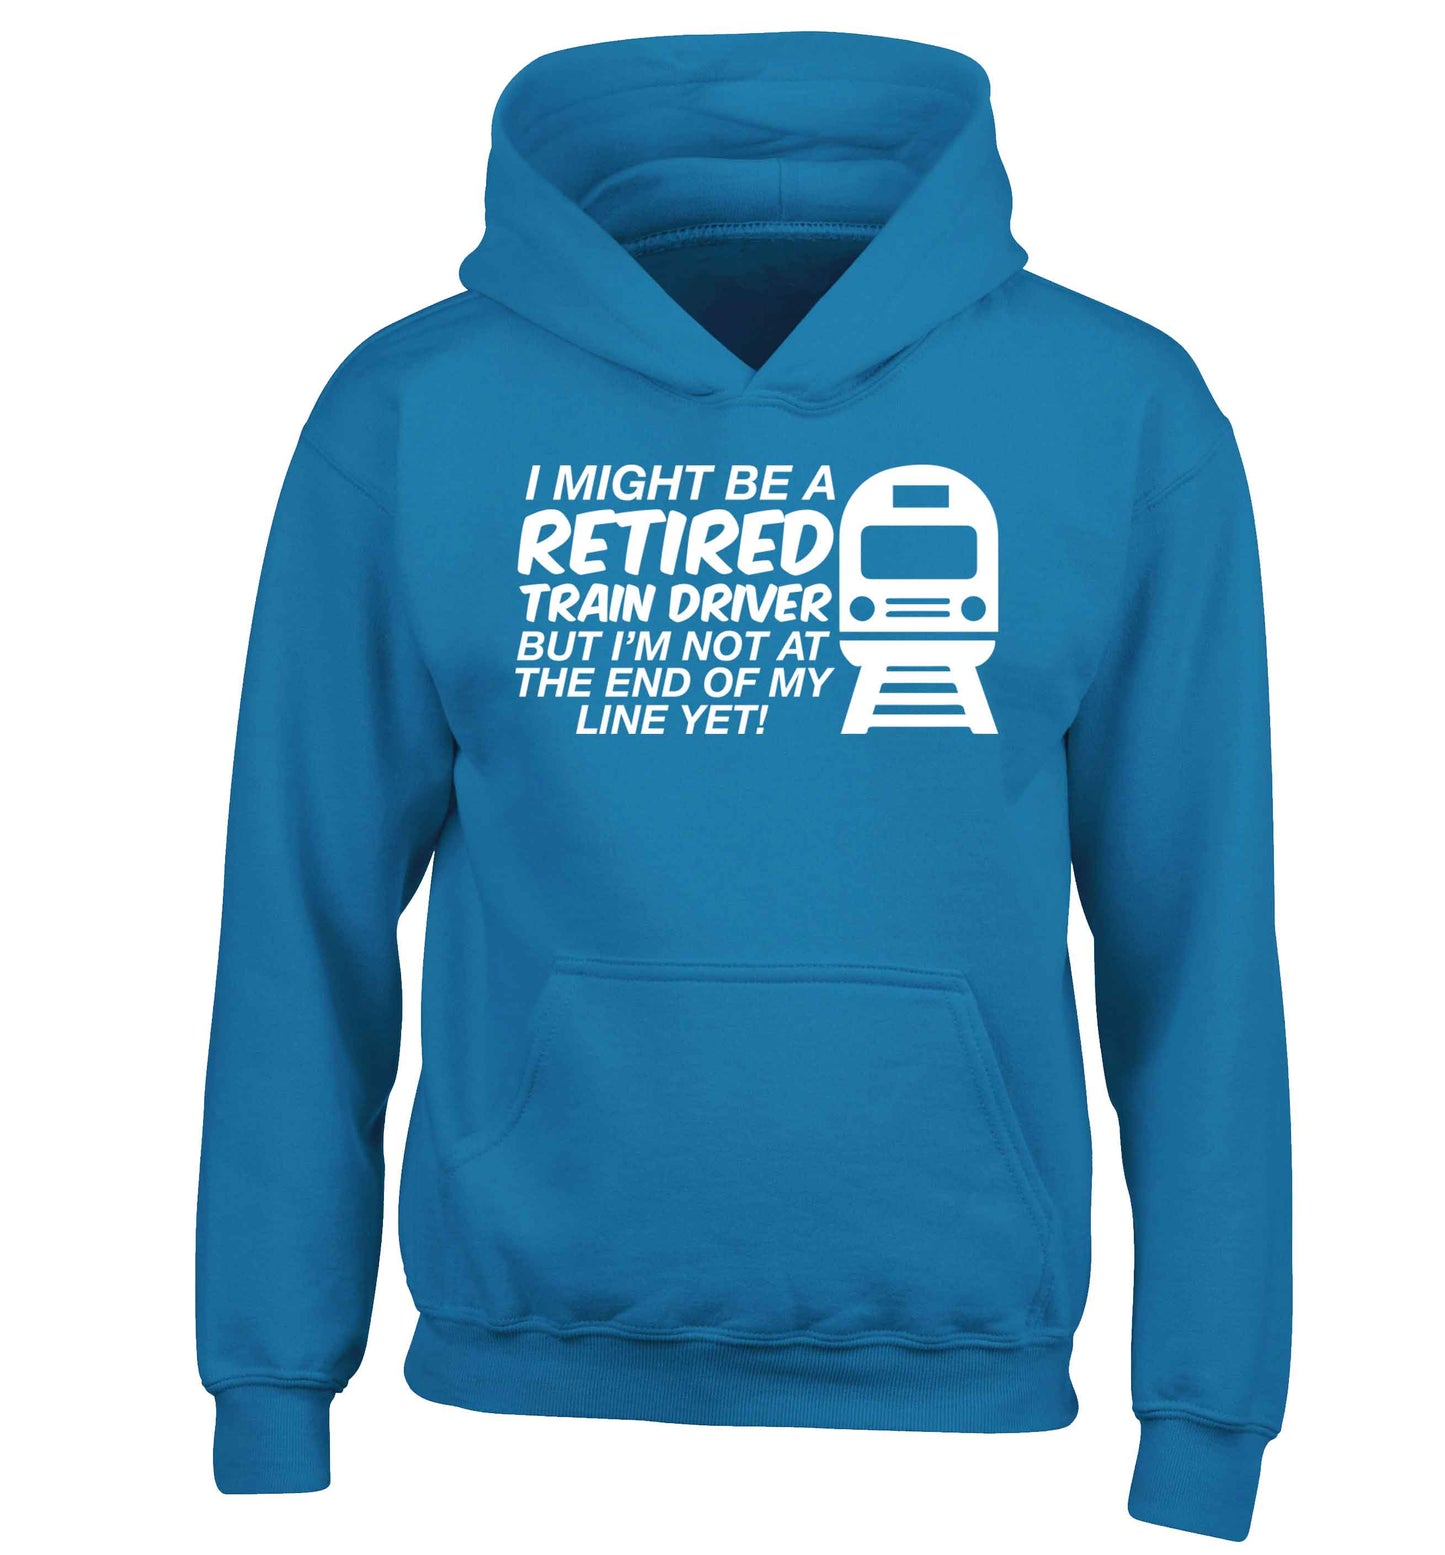 Retired train driver but I'm not at the end of my line yet children's blue hoodie 12-13 Years